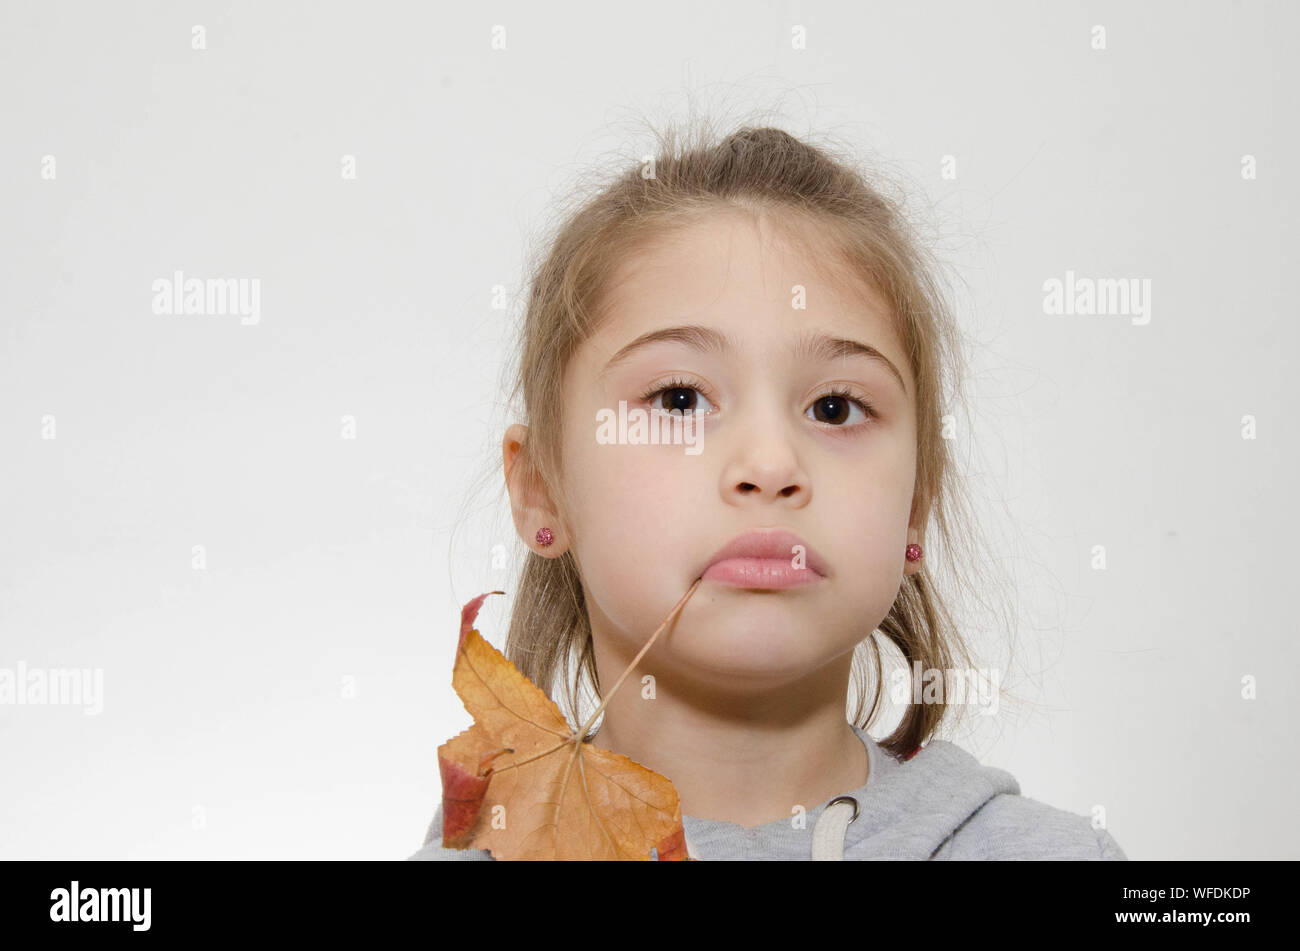 Close-up Portrait Of Cute Girl Biting Dry Leaf Stem Against White Background Stock Photo